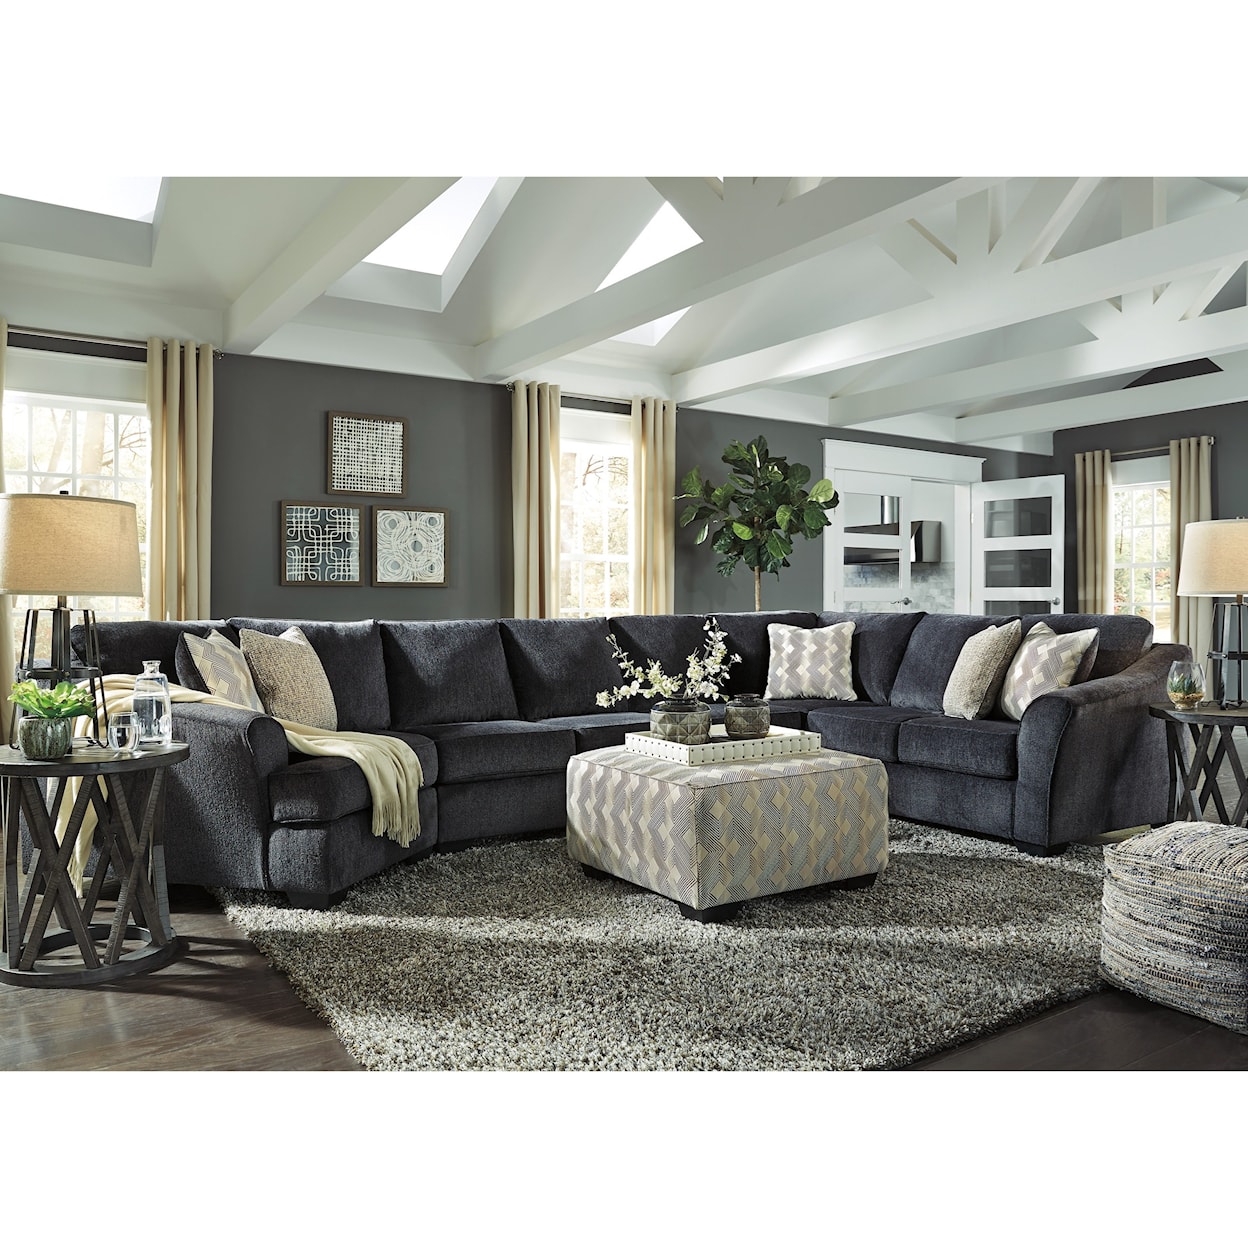 Signature Design by Ashley Eltmann Stationary Living Room Group